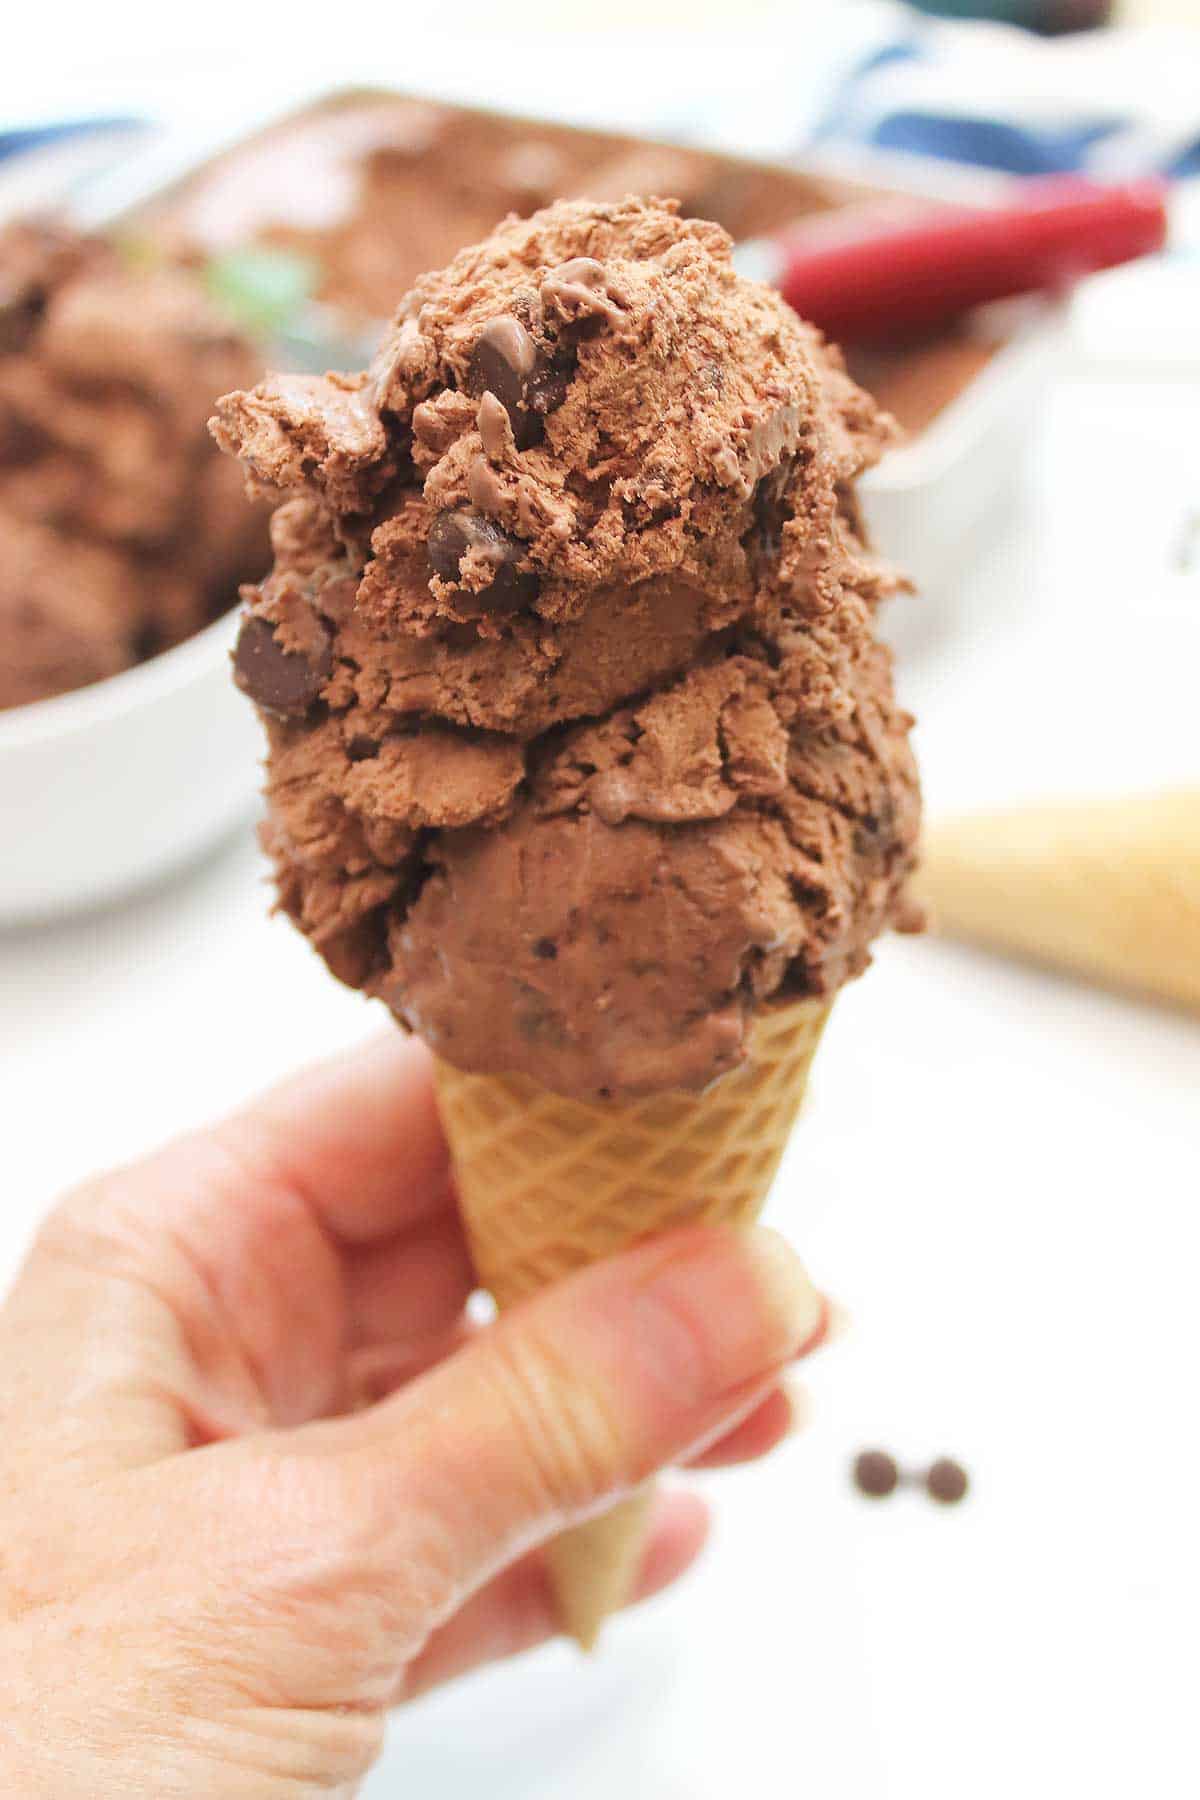 Double scoop of chocolate ice cream in a sugar cone.